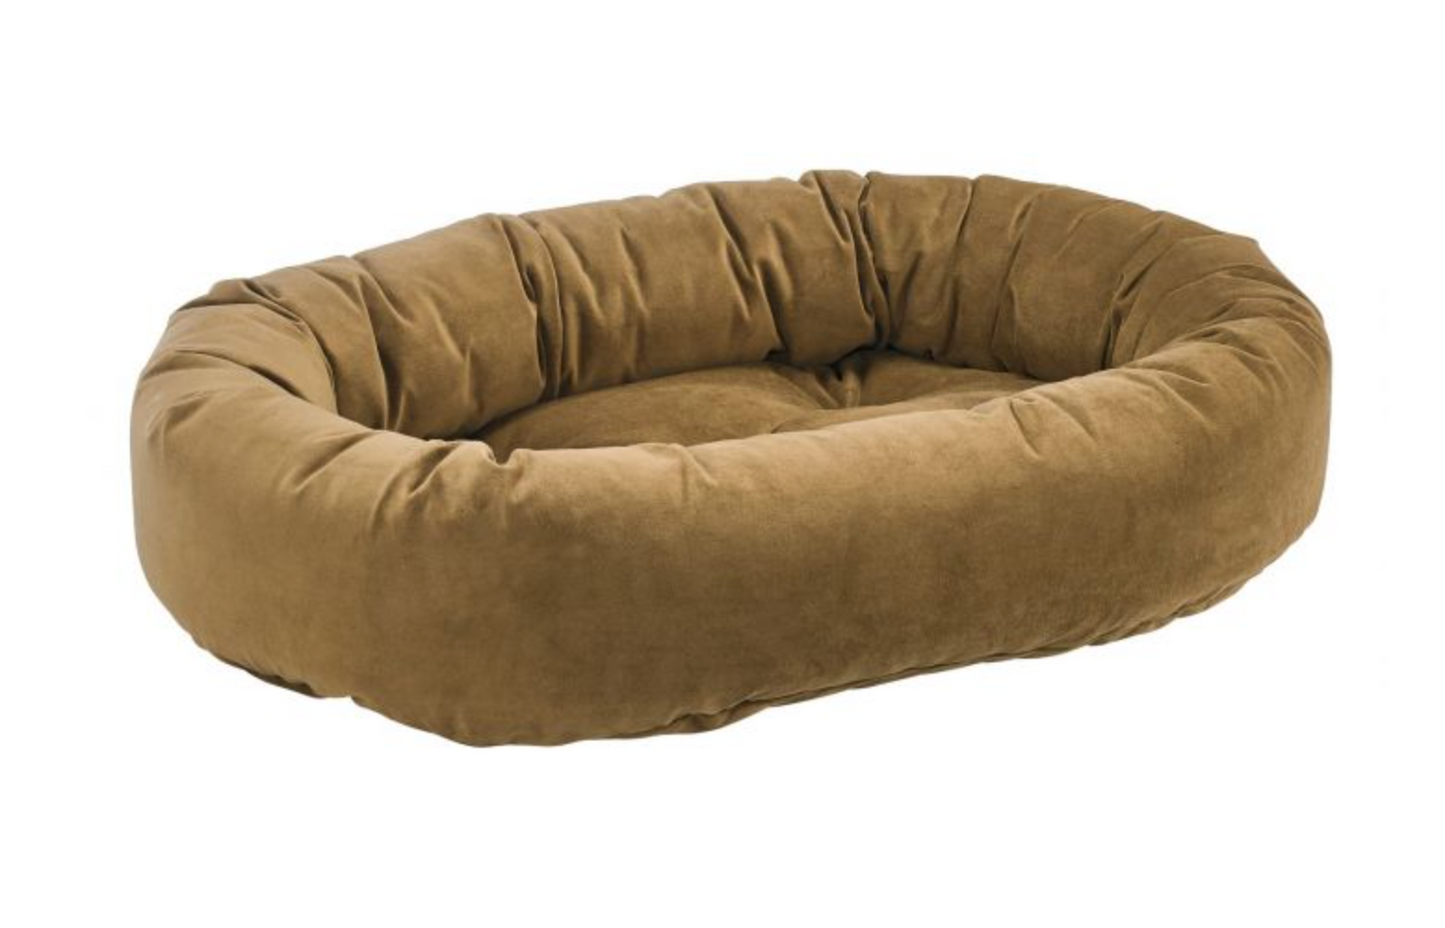 Donut Pet Bed - Toffee